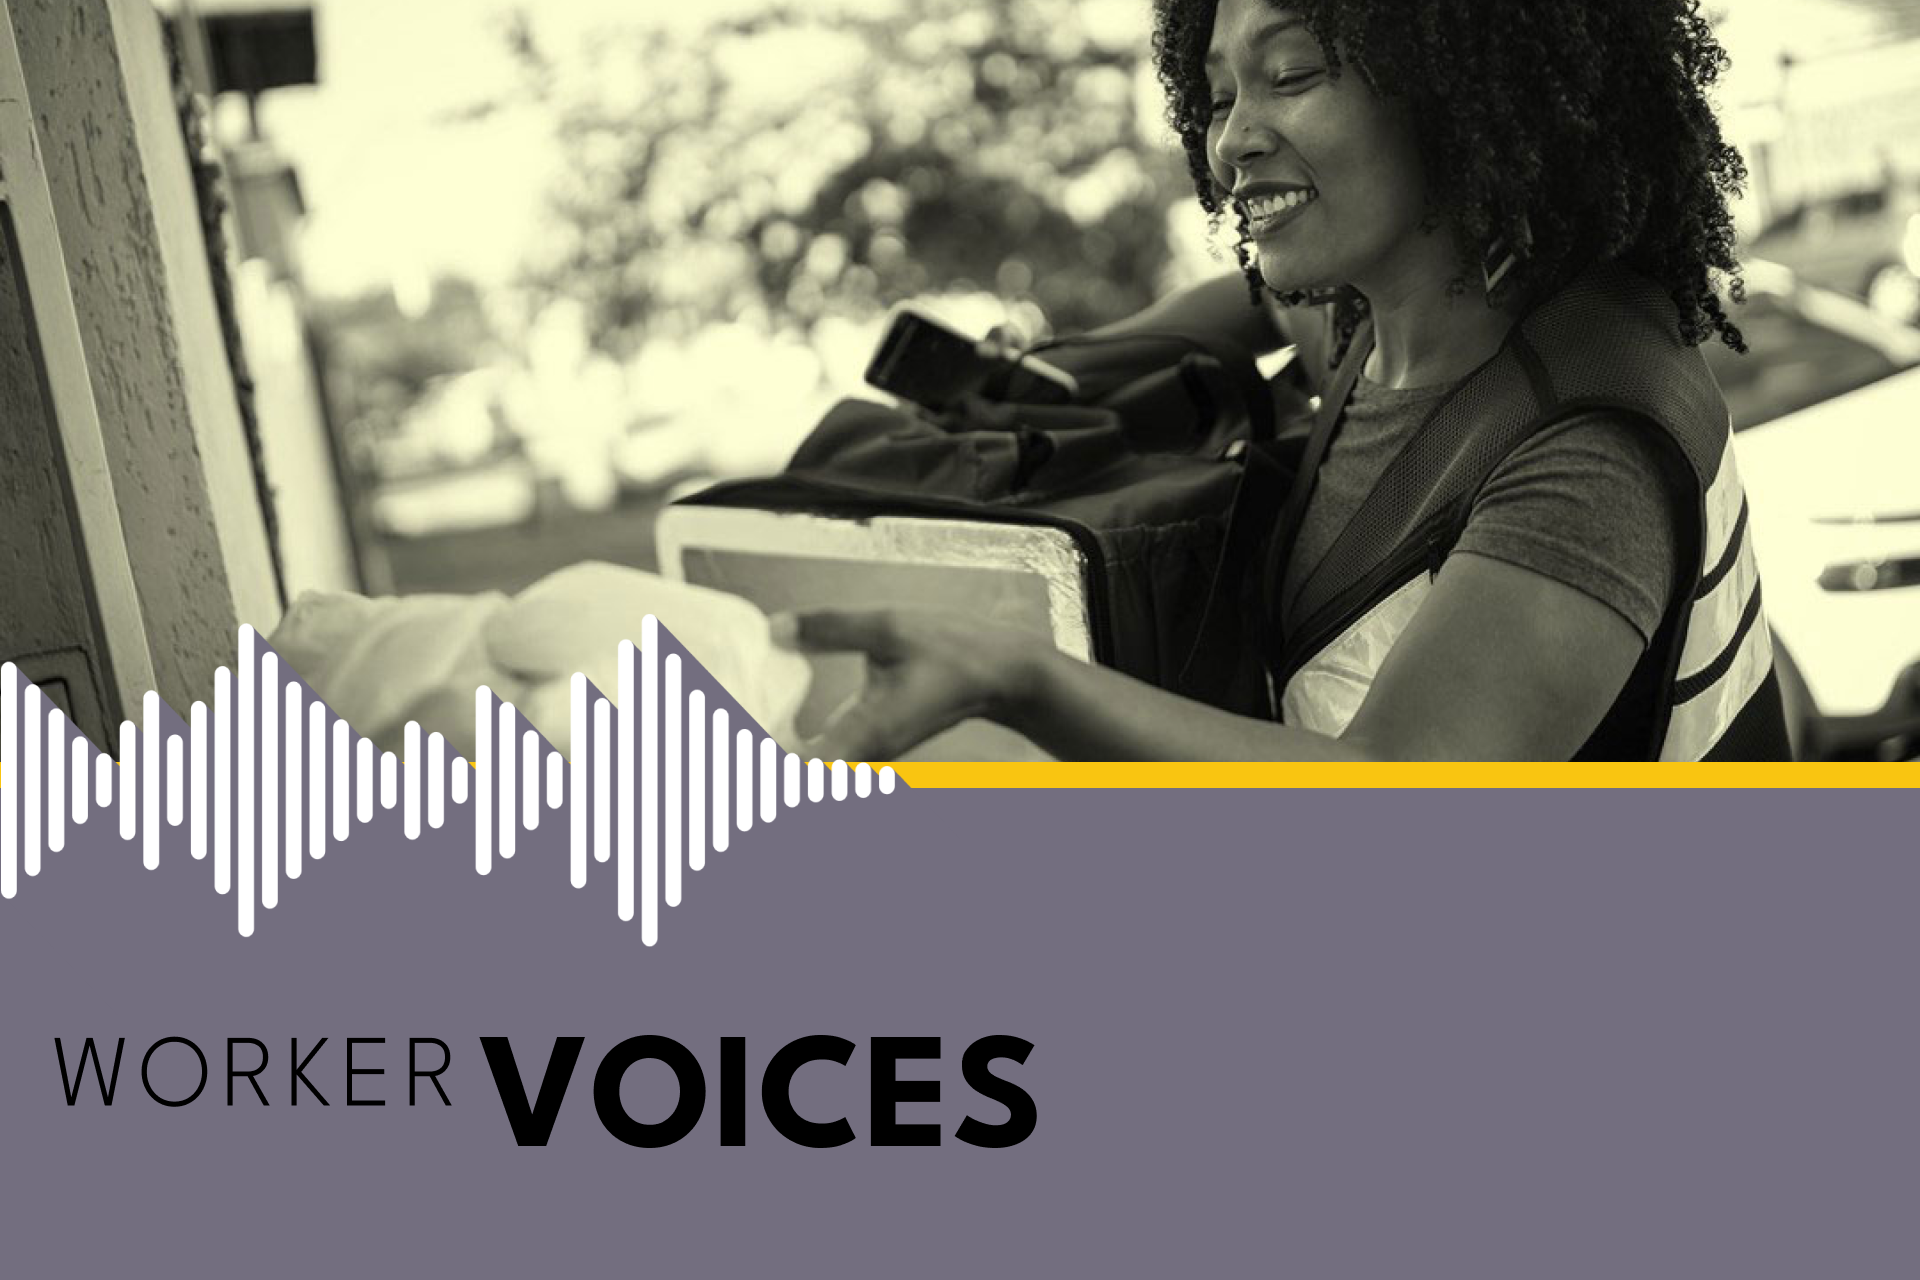 The Worker Voices Project is a Federal Reserve System research effort to understand the experiences of workers in low-wage roles and nondegree job see